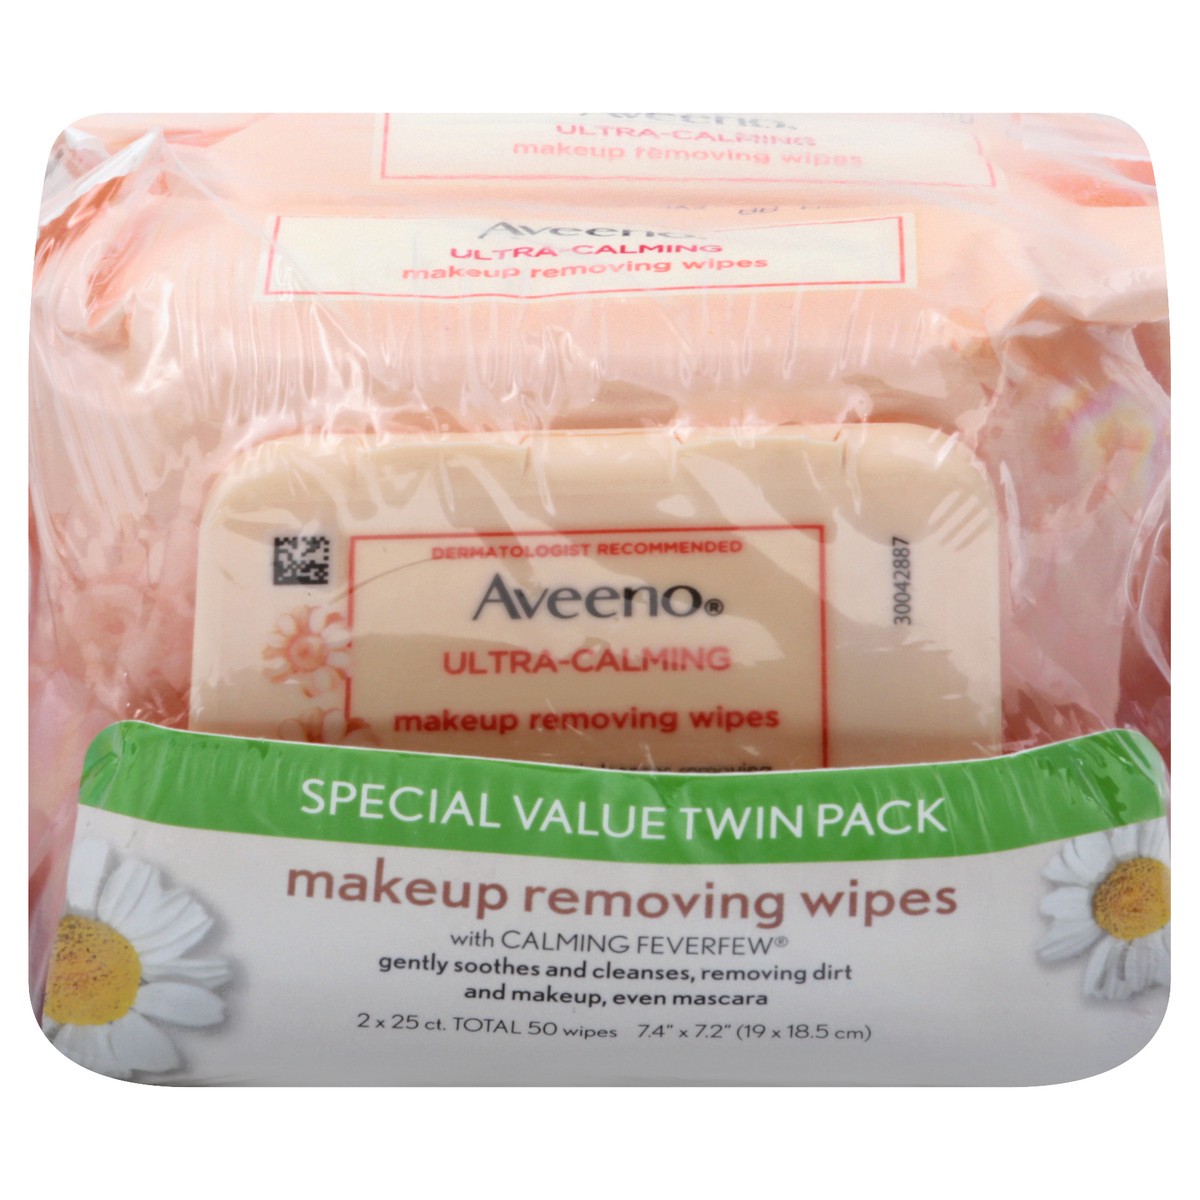 slide 1 of 9, Aveeno Ultra-Calming Makeup Removing Facial Cleansing Wipes with Calming Feverfew Extract, Oil-Free Soothing Face Wipes for Sensitive Skin, Gentle & Non-Comedogenic, Twin Pack, 2 x 25 ct, 50 ct